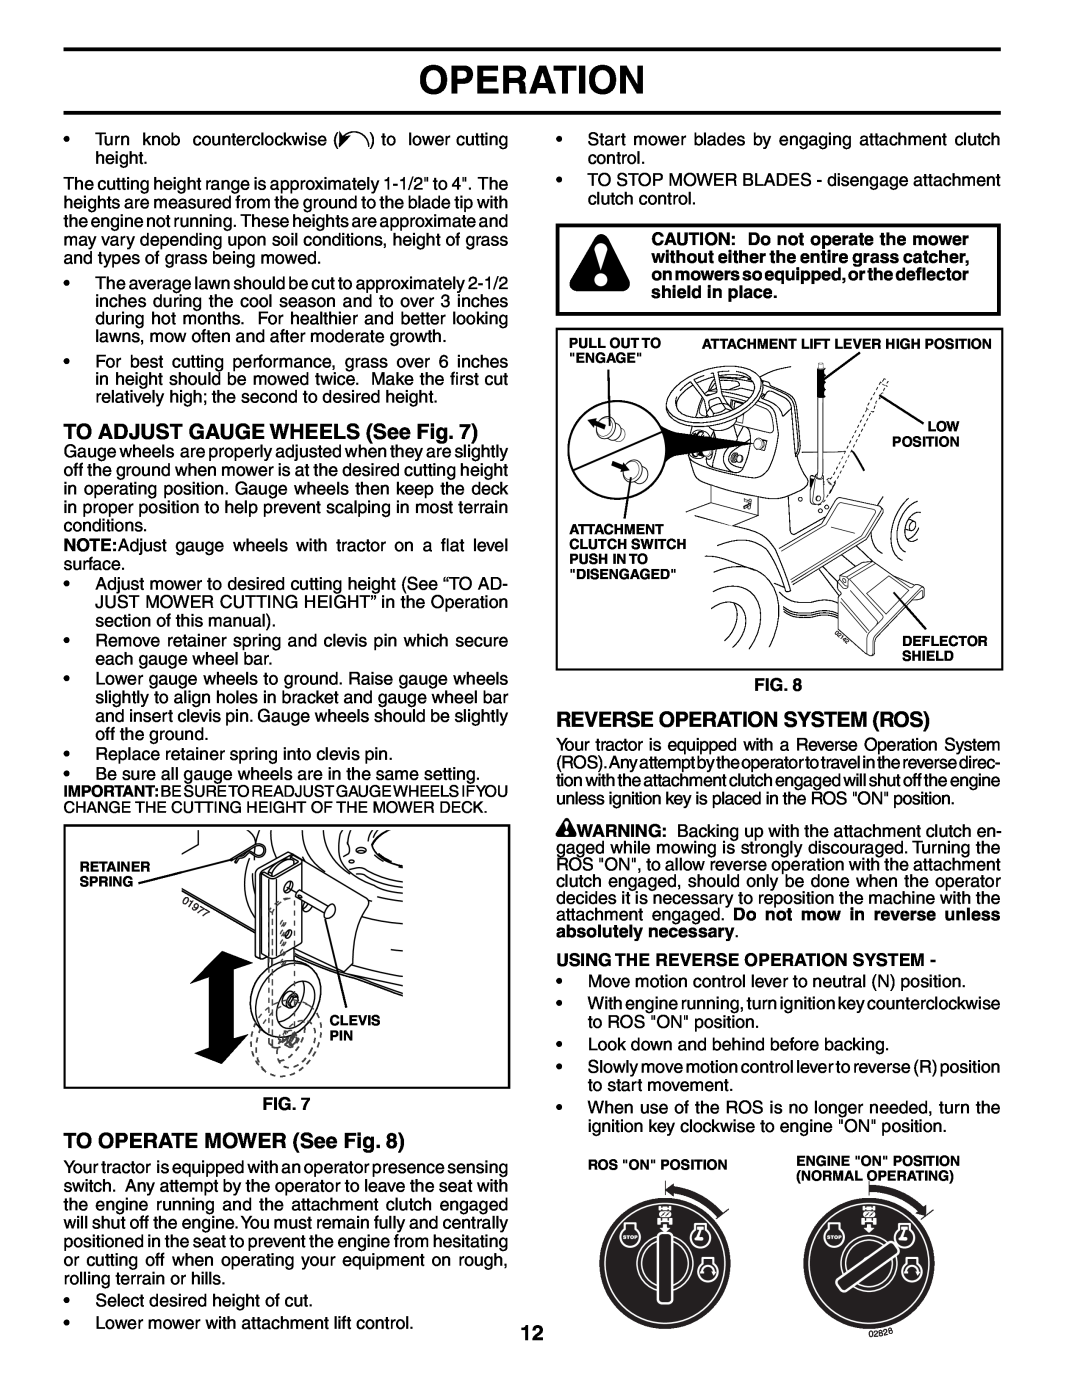 Poulan PD24PH42ST manual TO ADJUST GAUGE WHEELS See Fig, TO OPERATE MOWER See Fig, Reverse Operation System Ros 